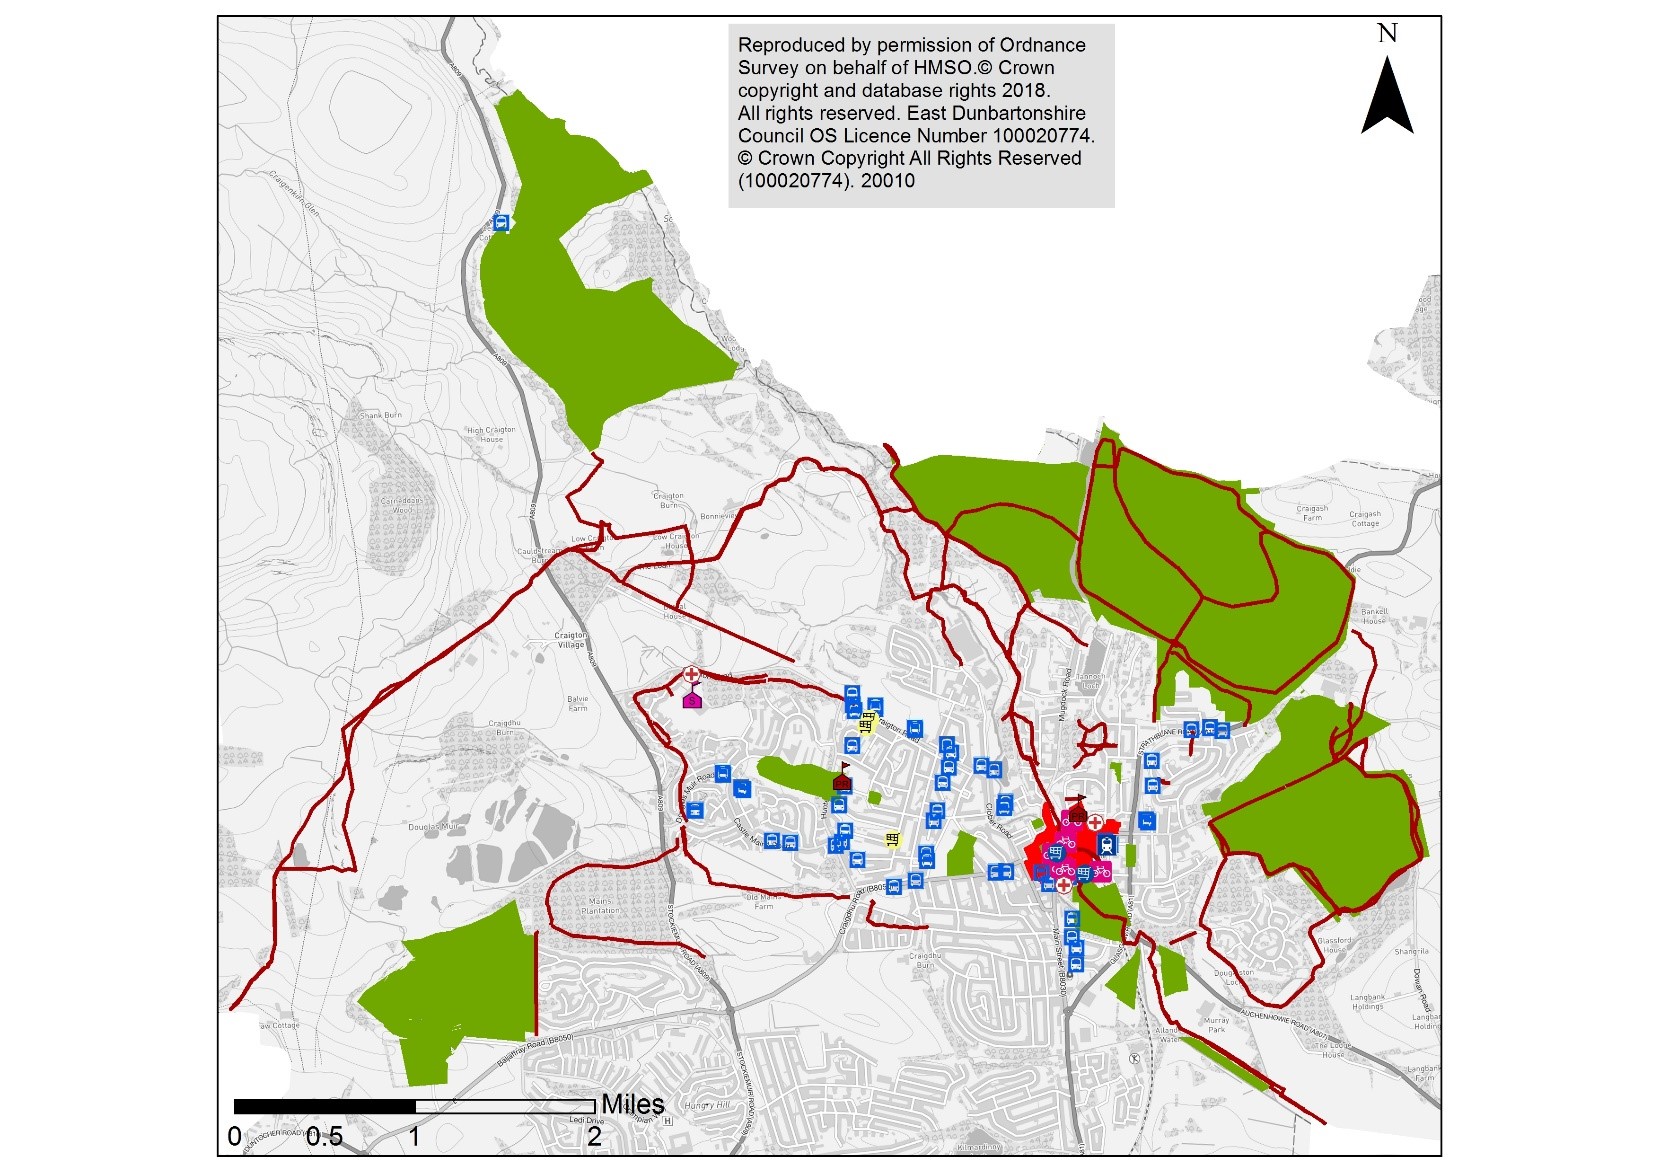 Title: Map of Milngavie - Description: Shows key trip generators and off-road active travel routes